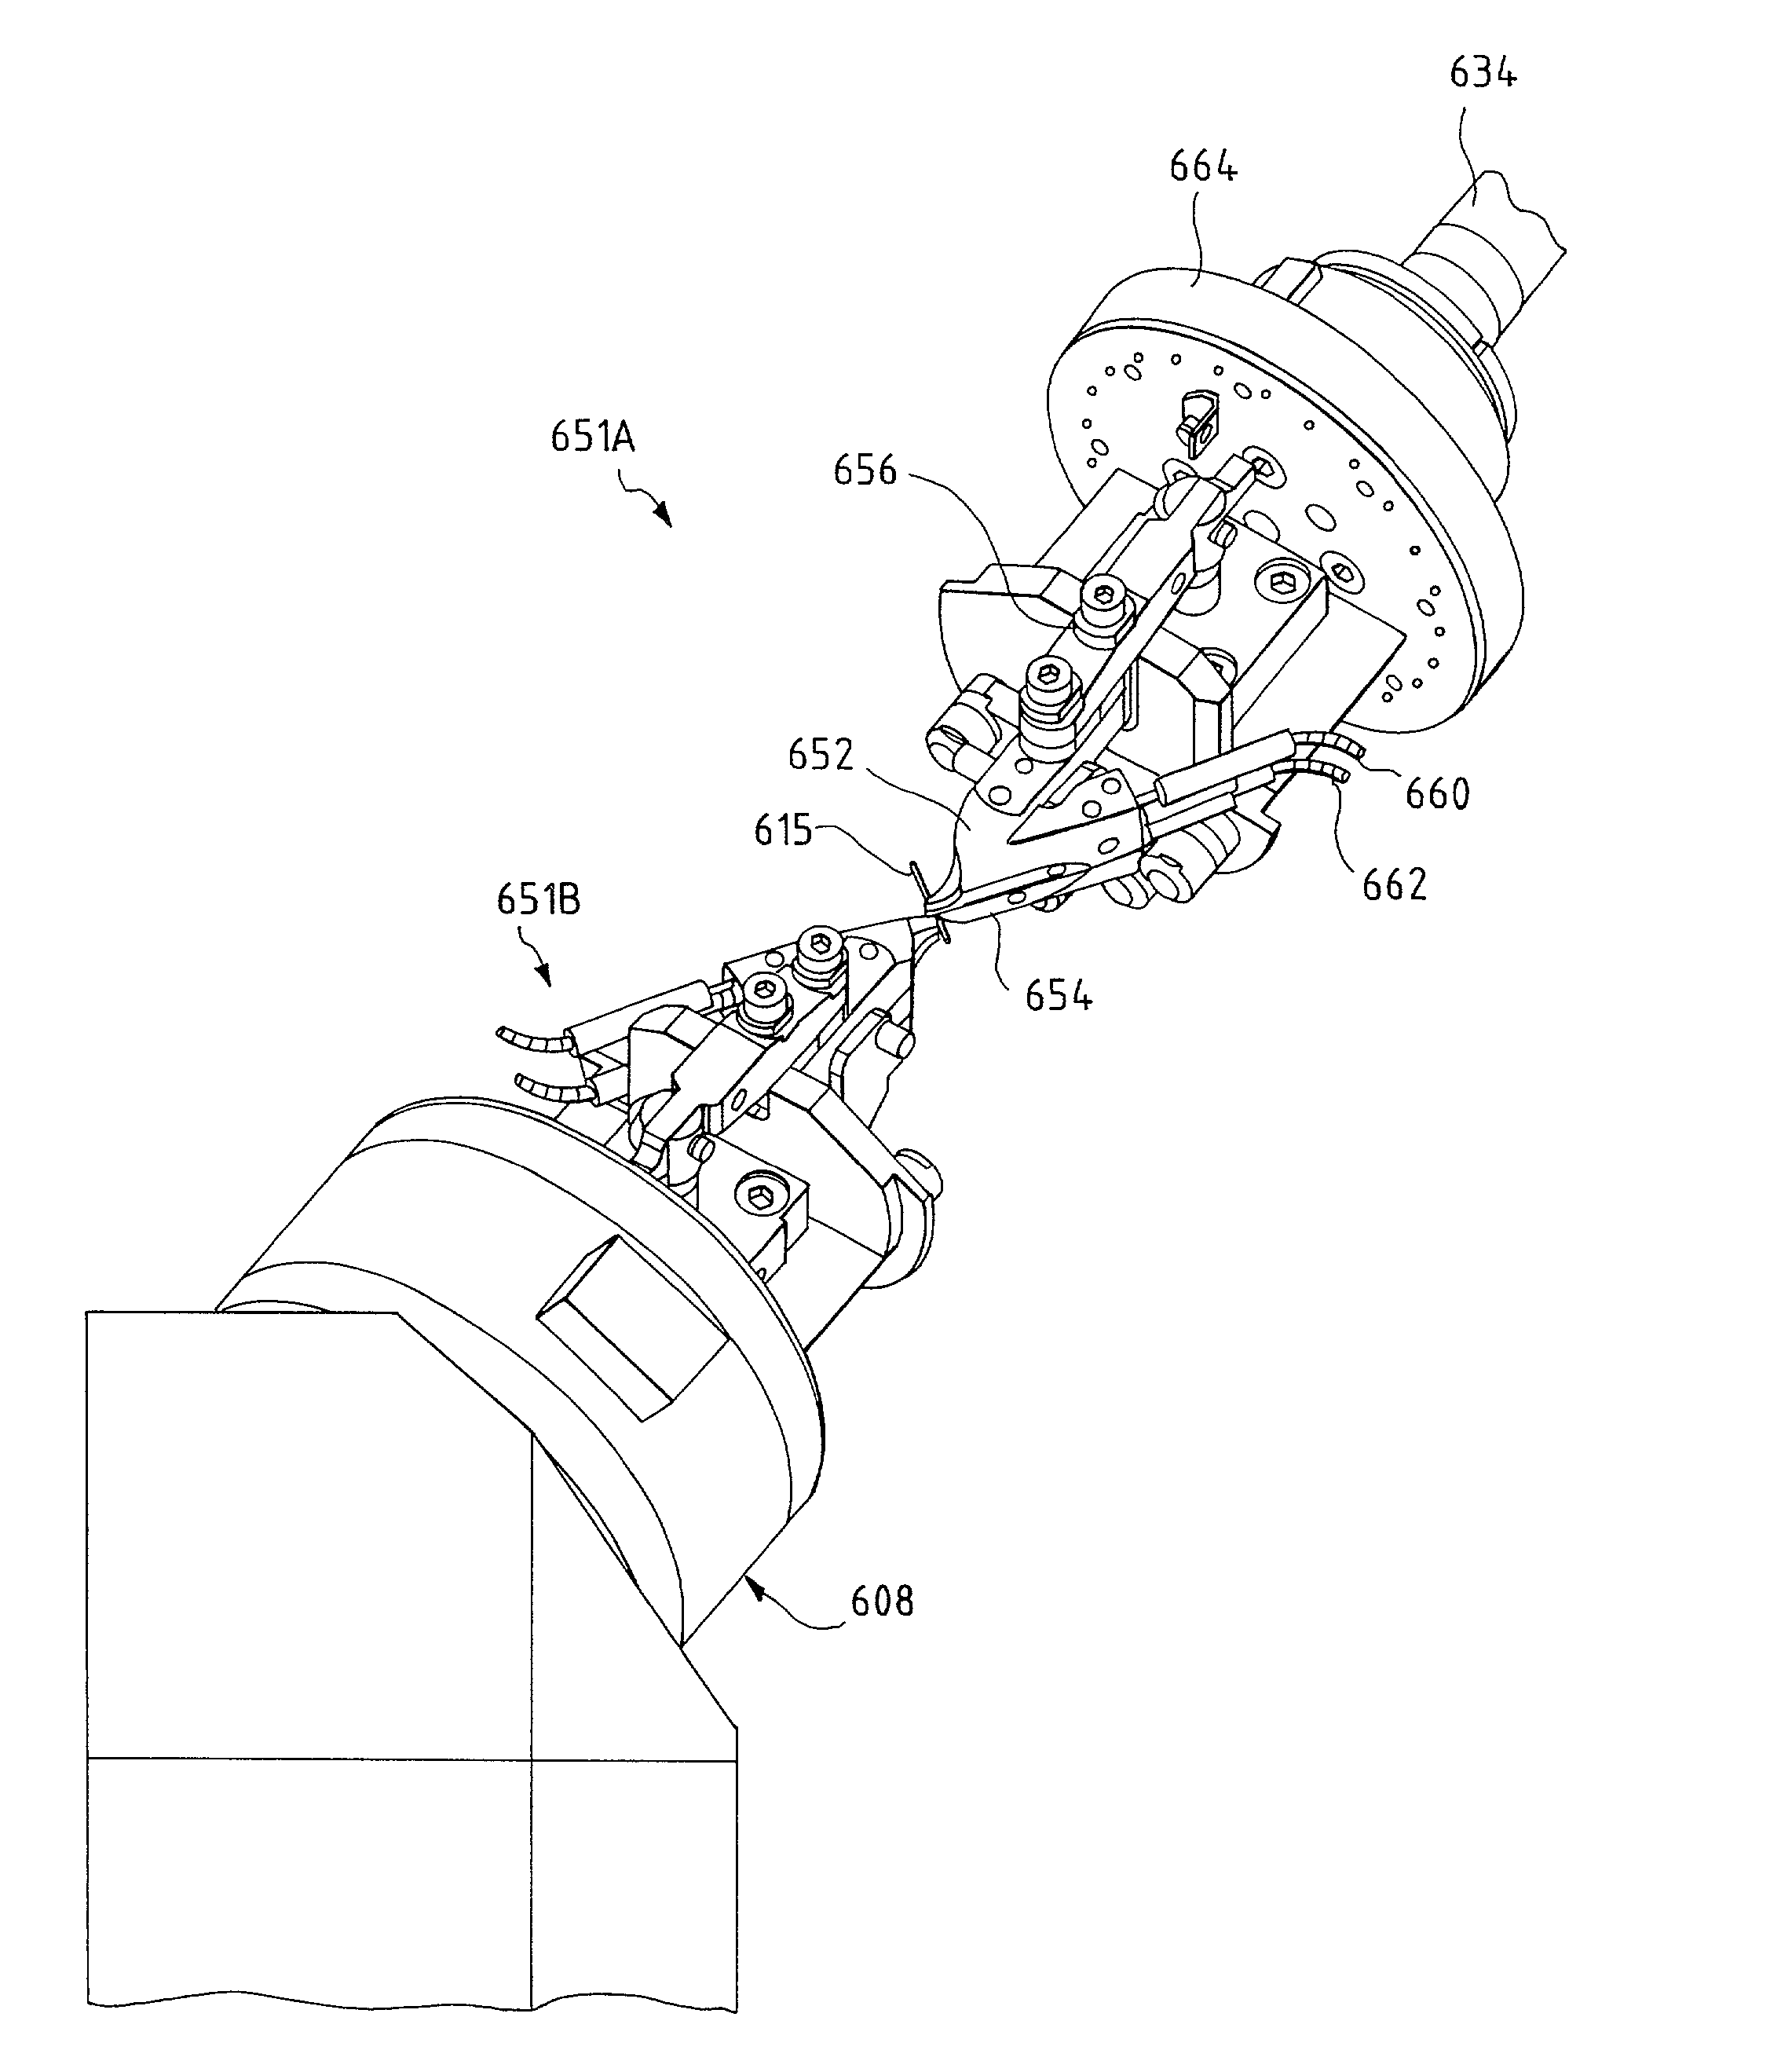 Robot and method for bending orthodontic archwires and other medical devices